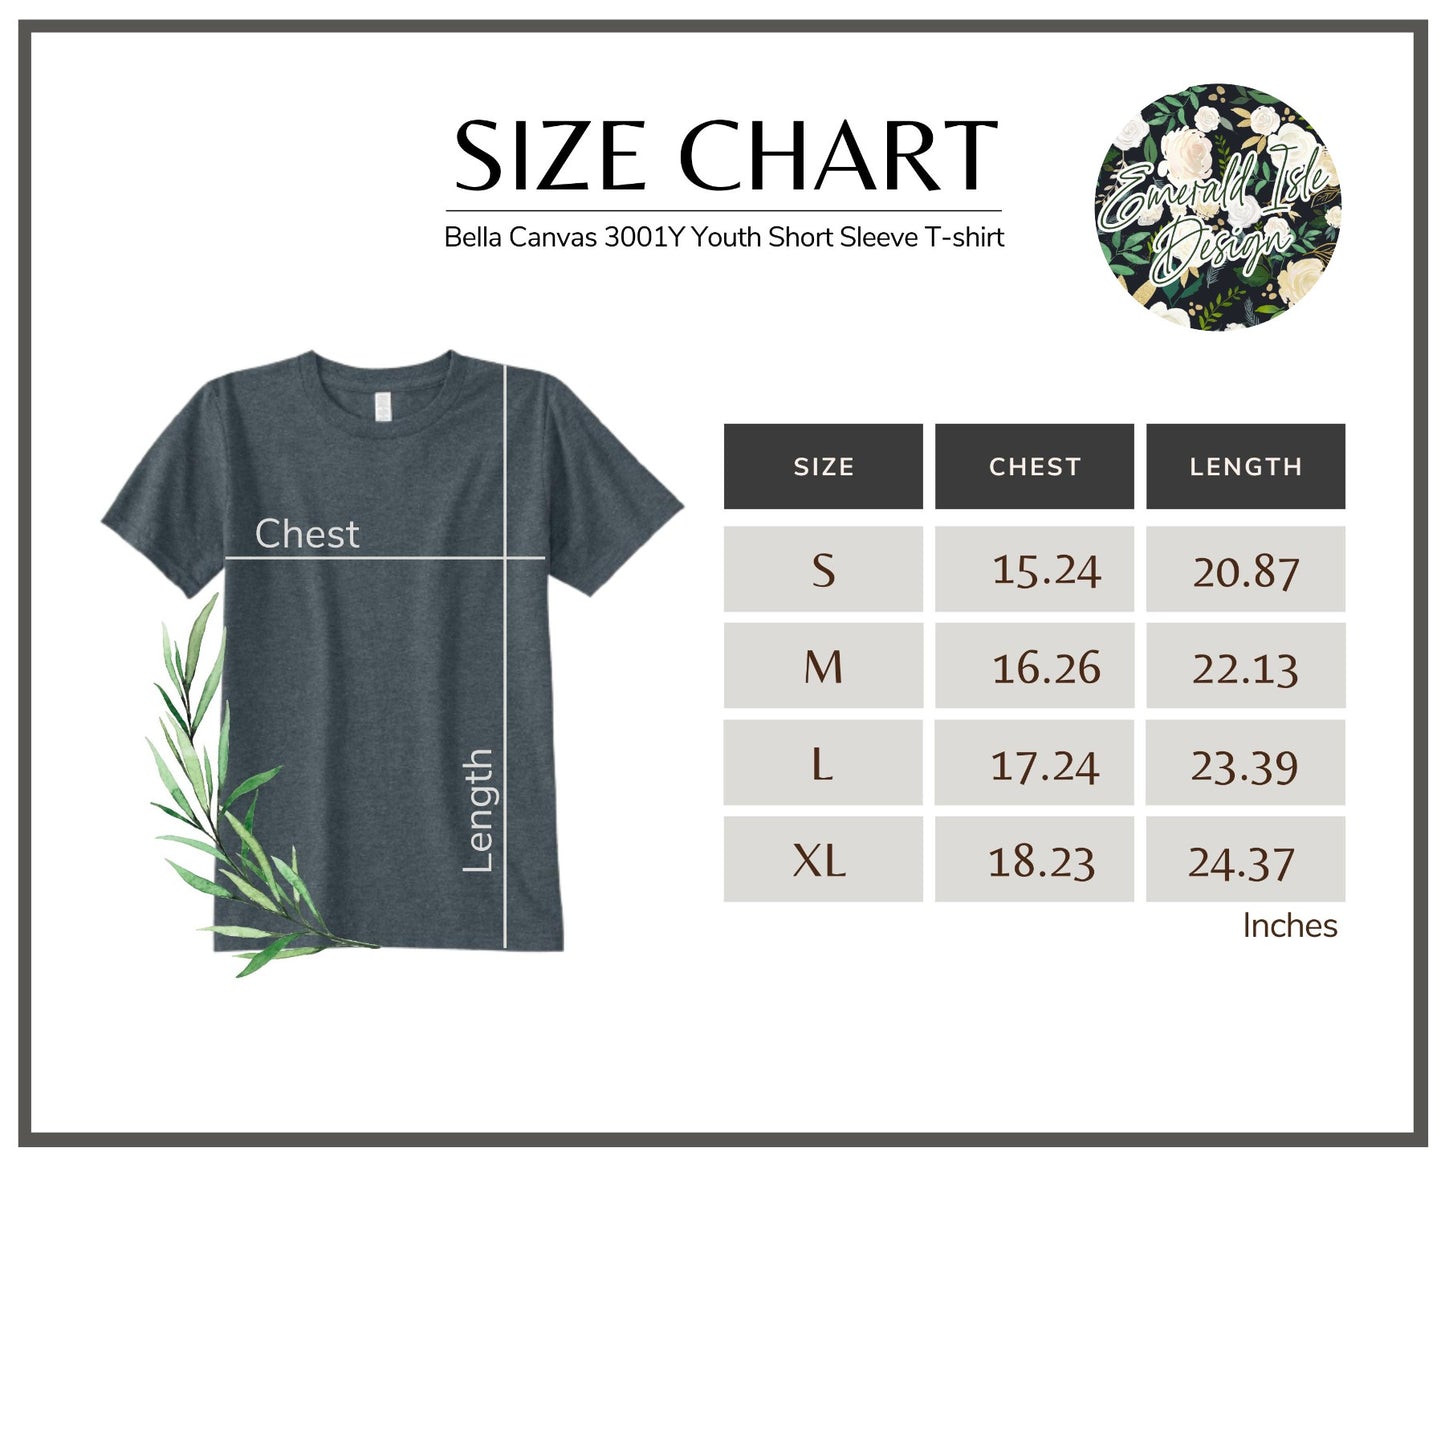 YOUTH SIZES Wordfill FRST Design